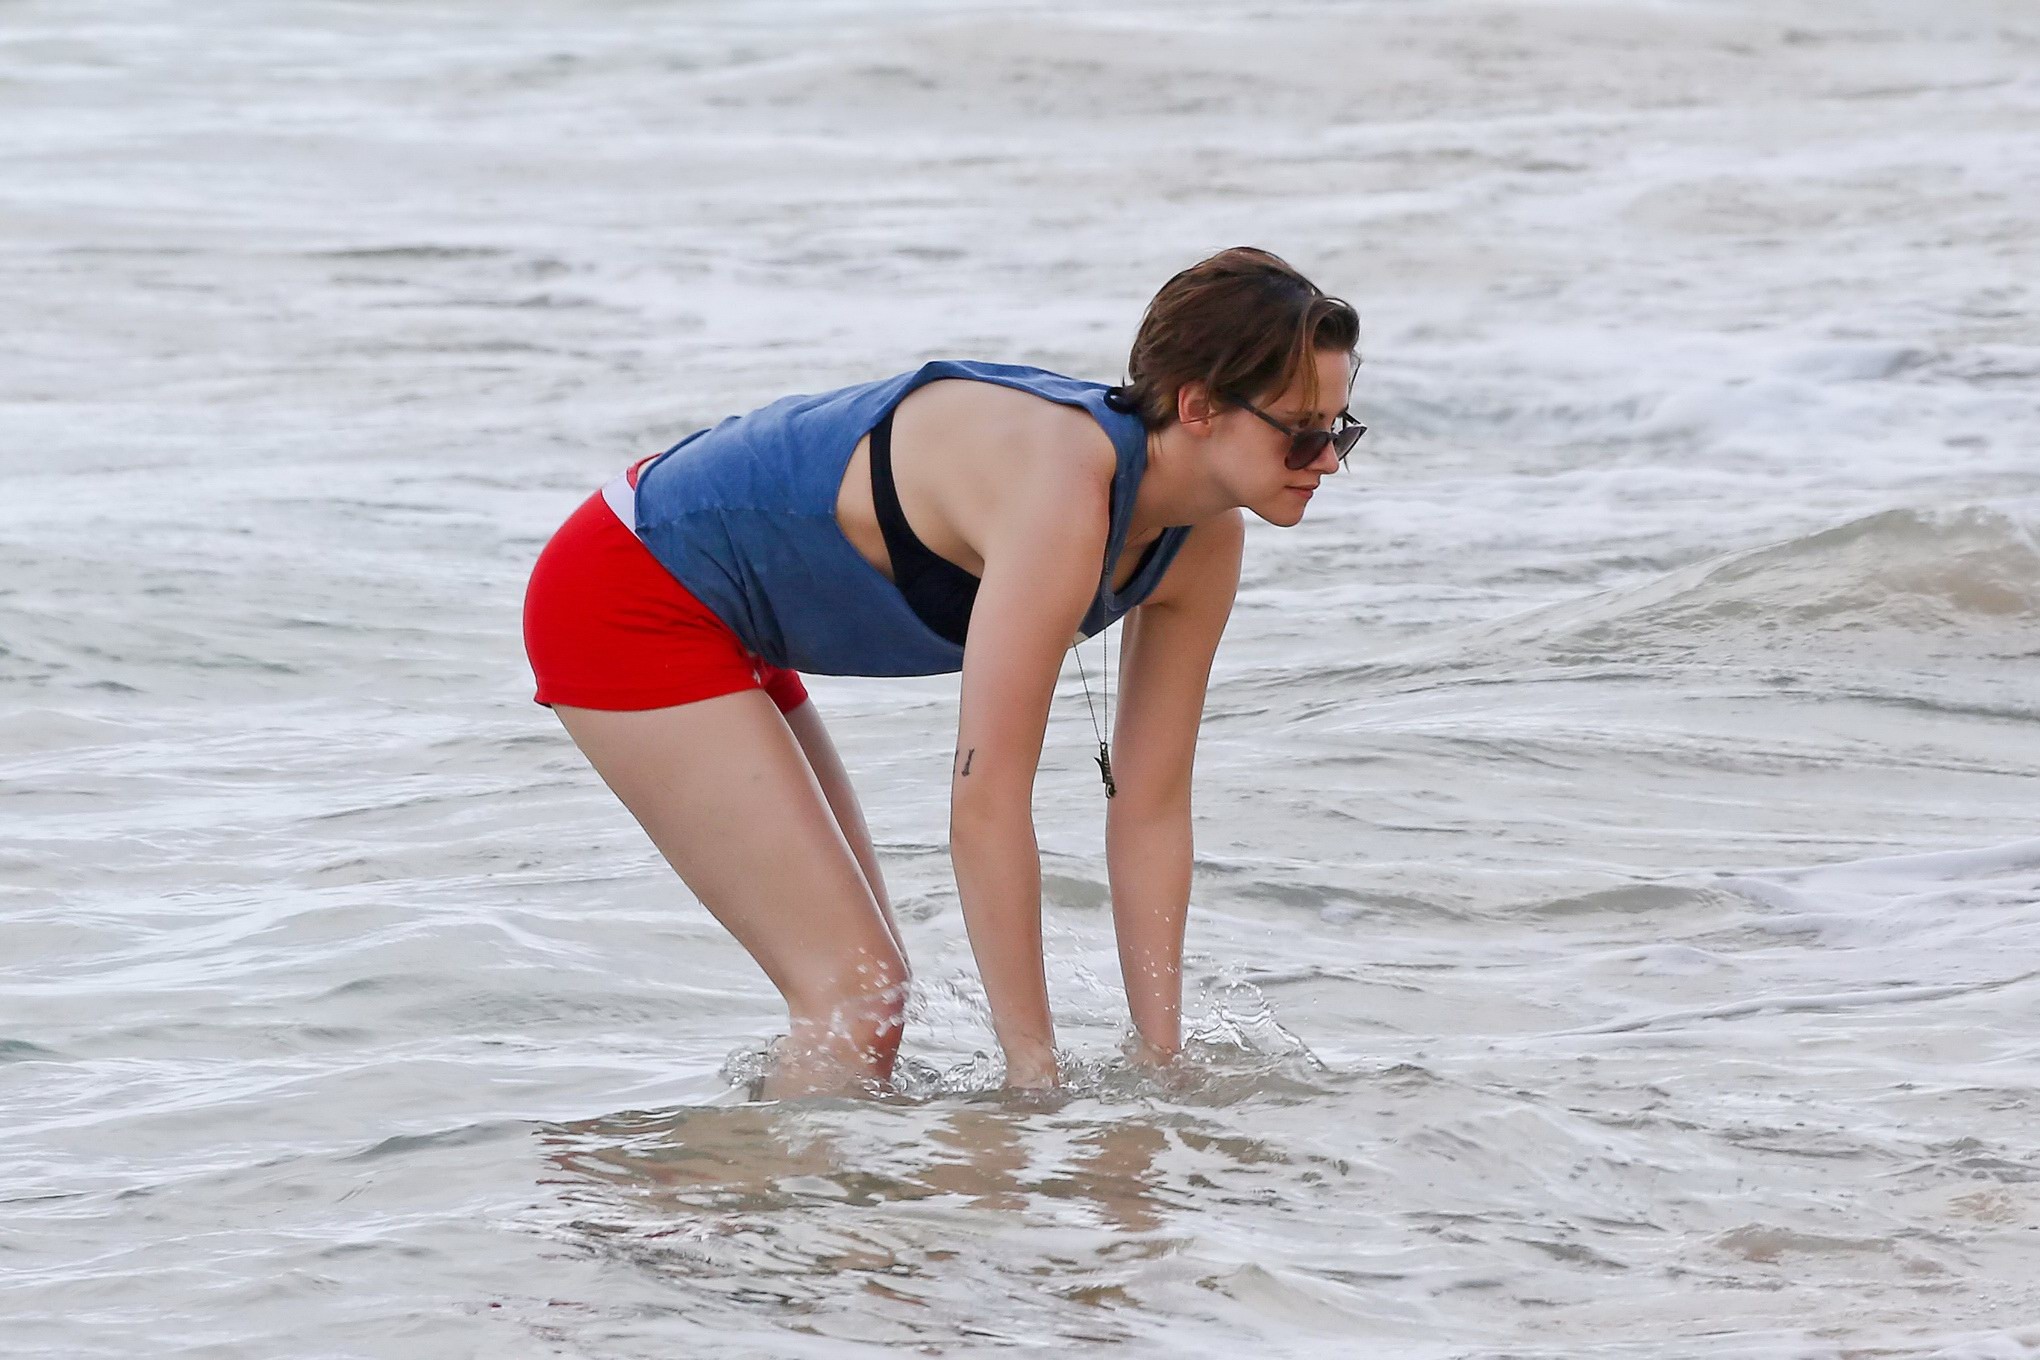 Kristen Stewart in bikini top and shorts kissing with some girl on the beach in  #75176217